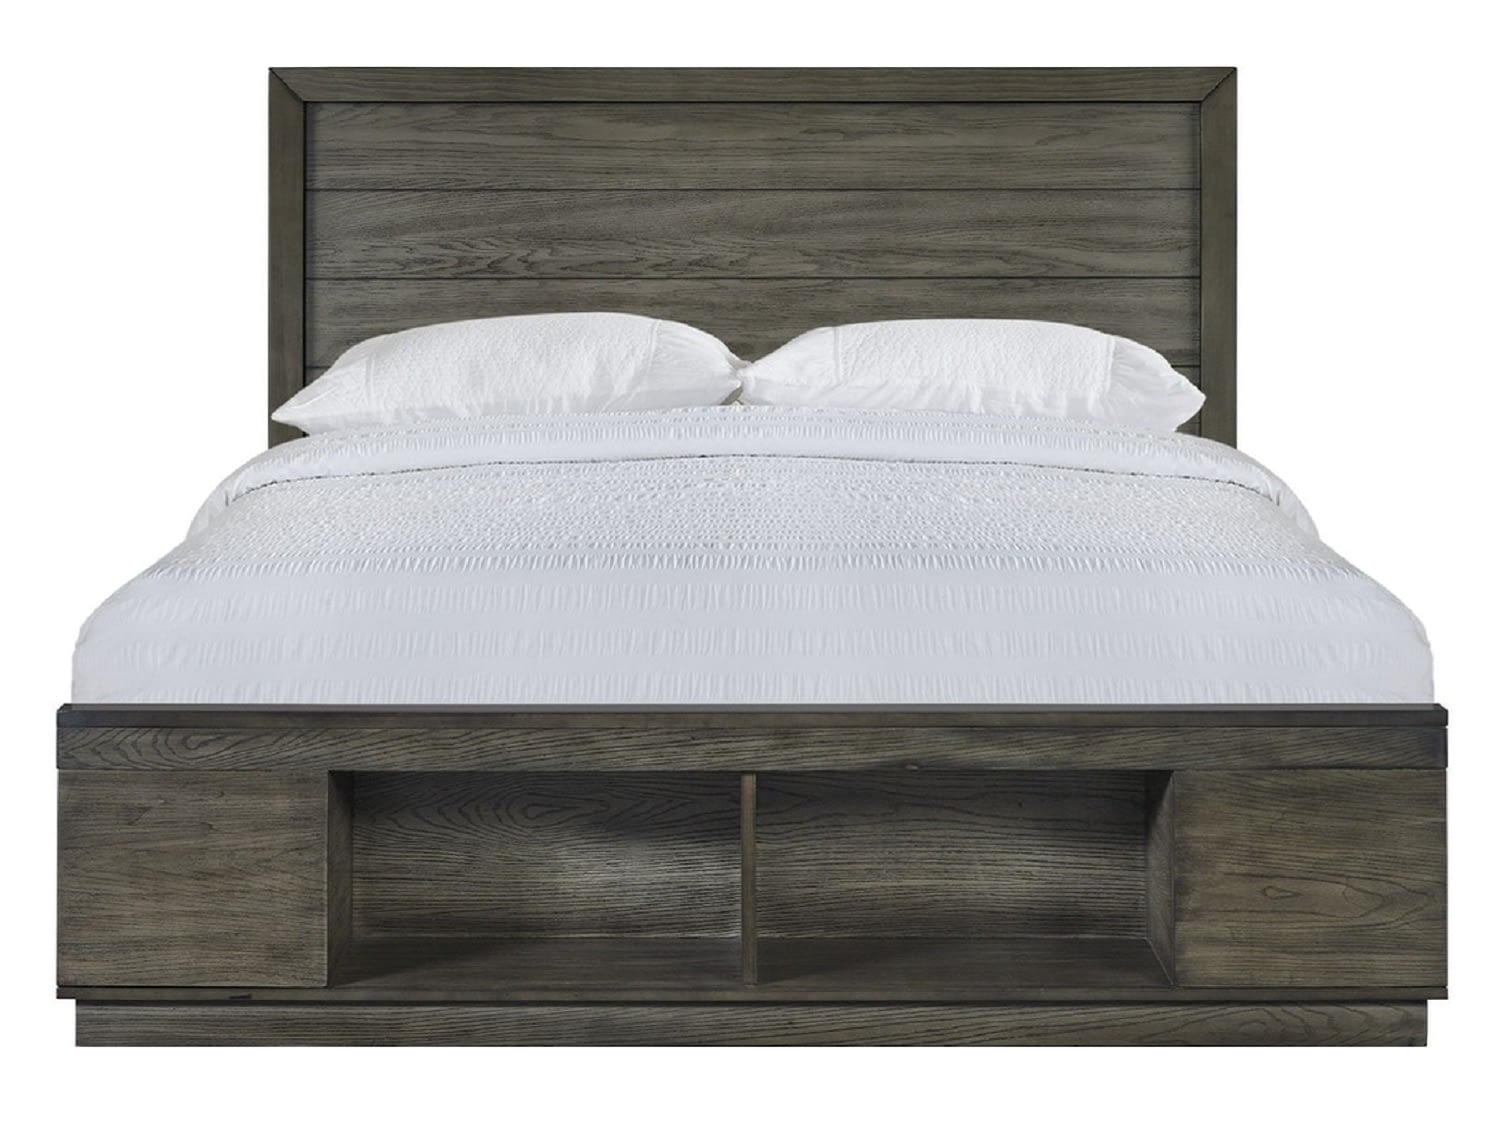 GENITO King Bed - Front Storage